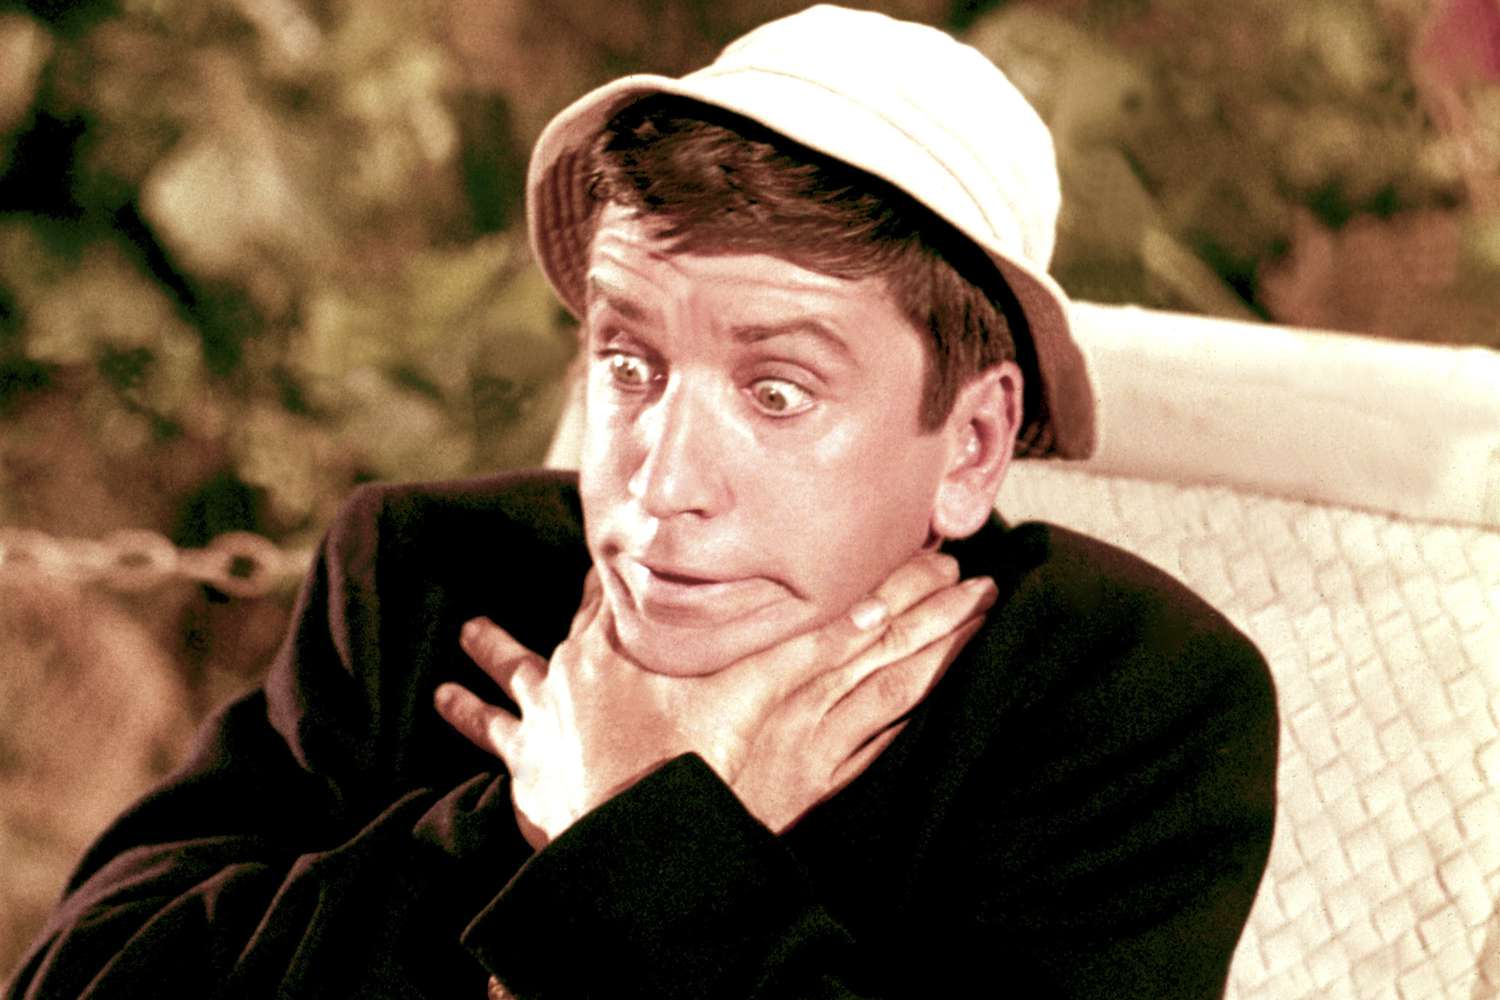 Billionaire accused of tormenting neighbor with 'Gilligan's Island' theme song - Entertainment Weekly